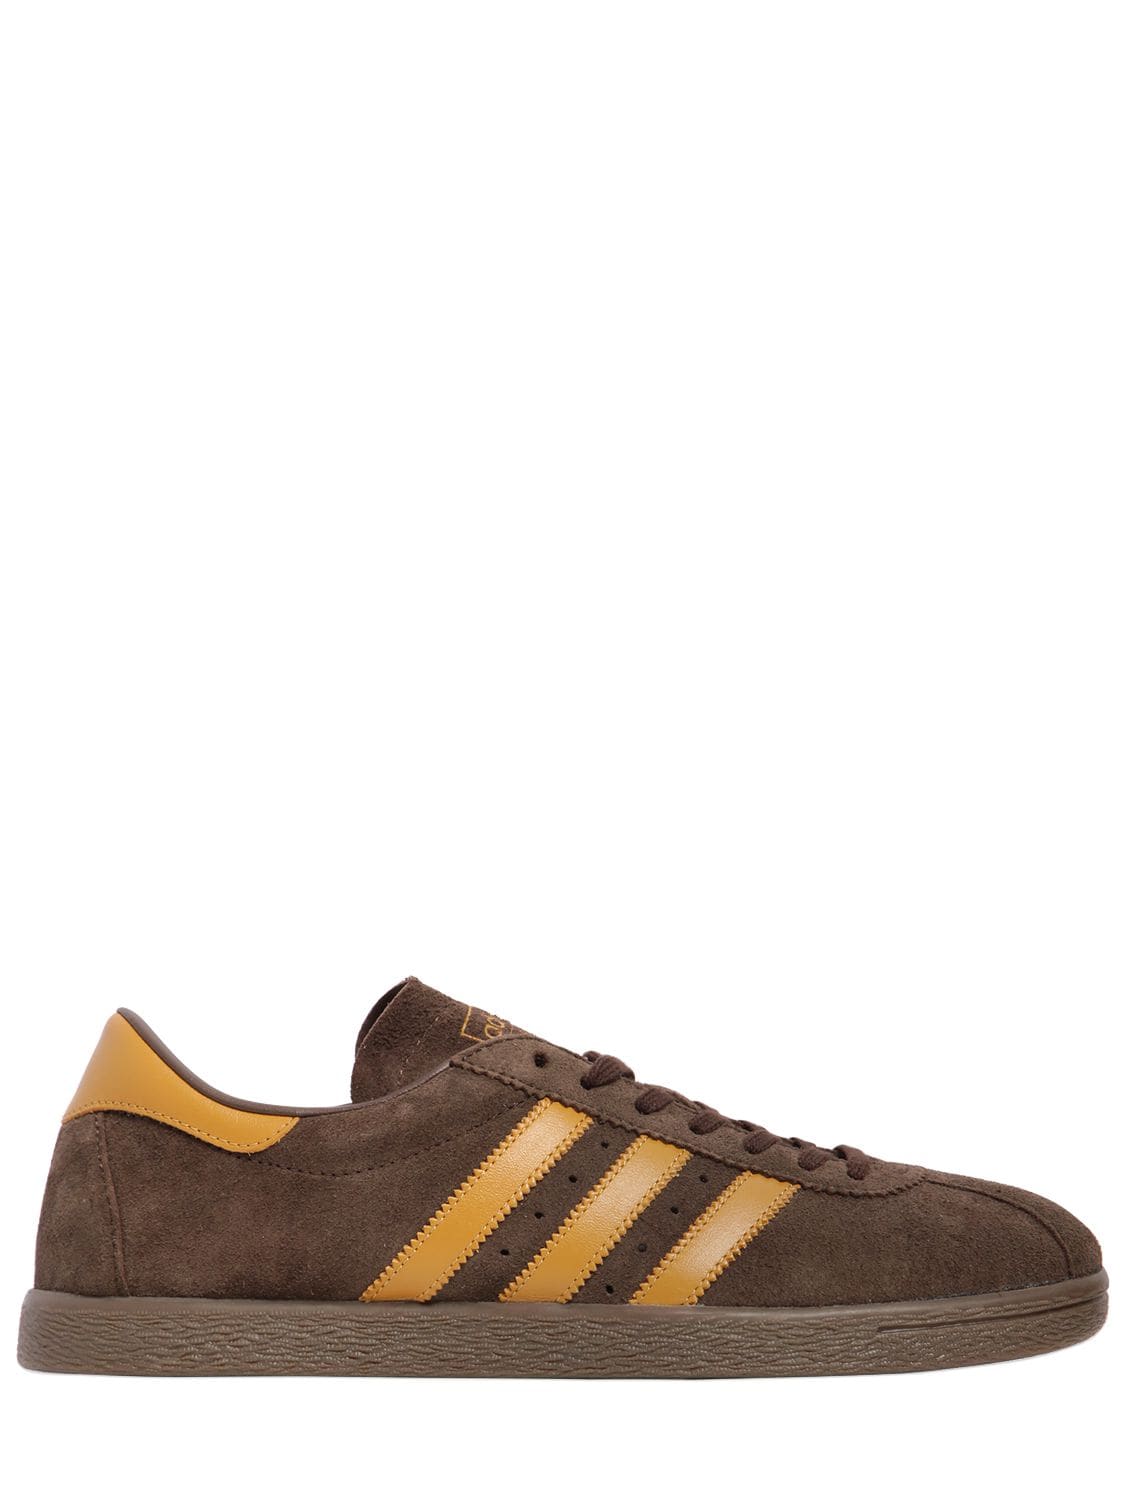 Adidas Originals Tobacco Suede & Leather Sneakers In Brown